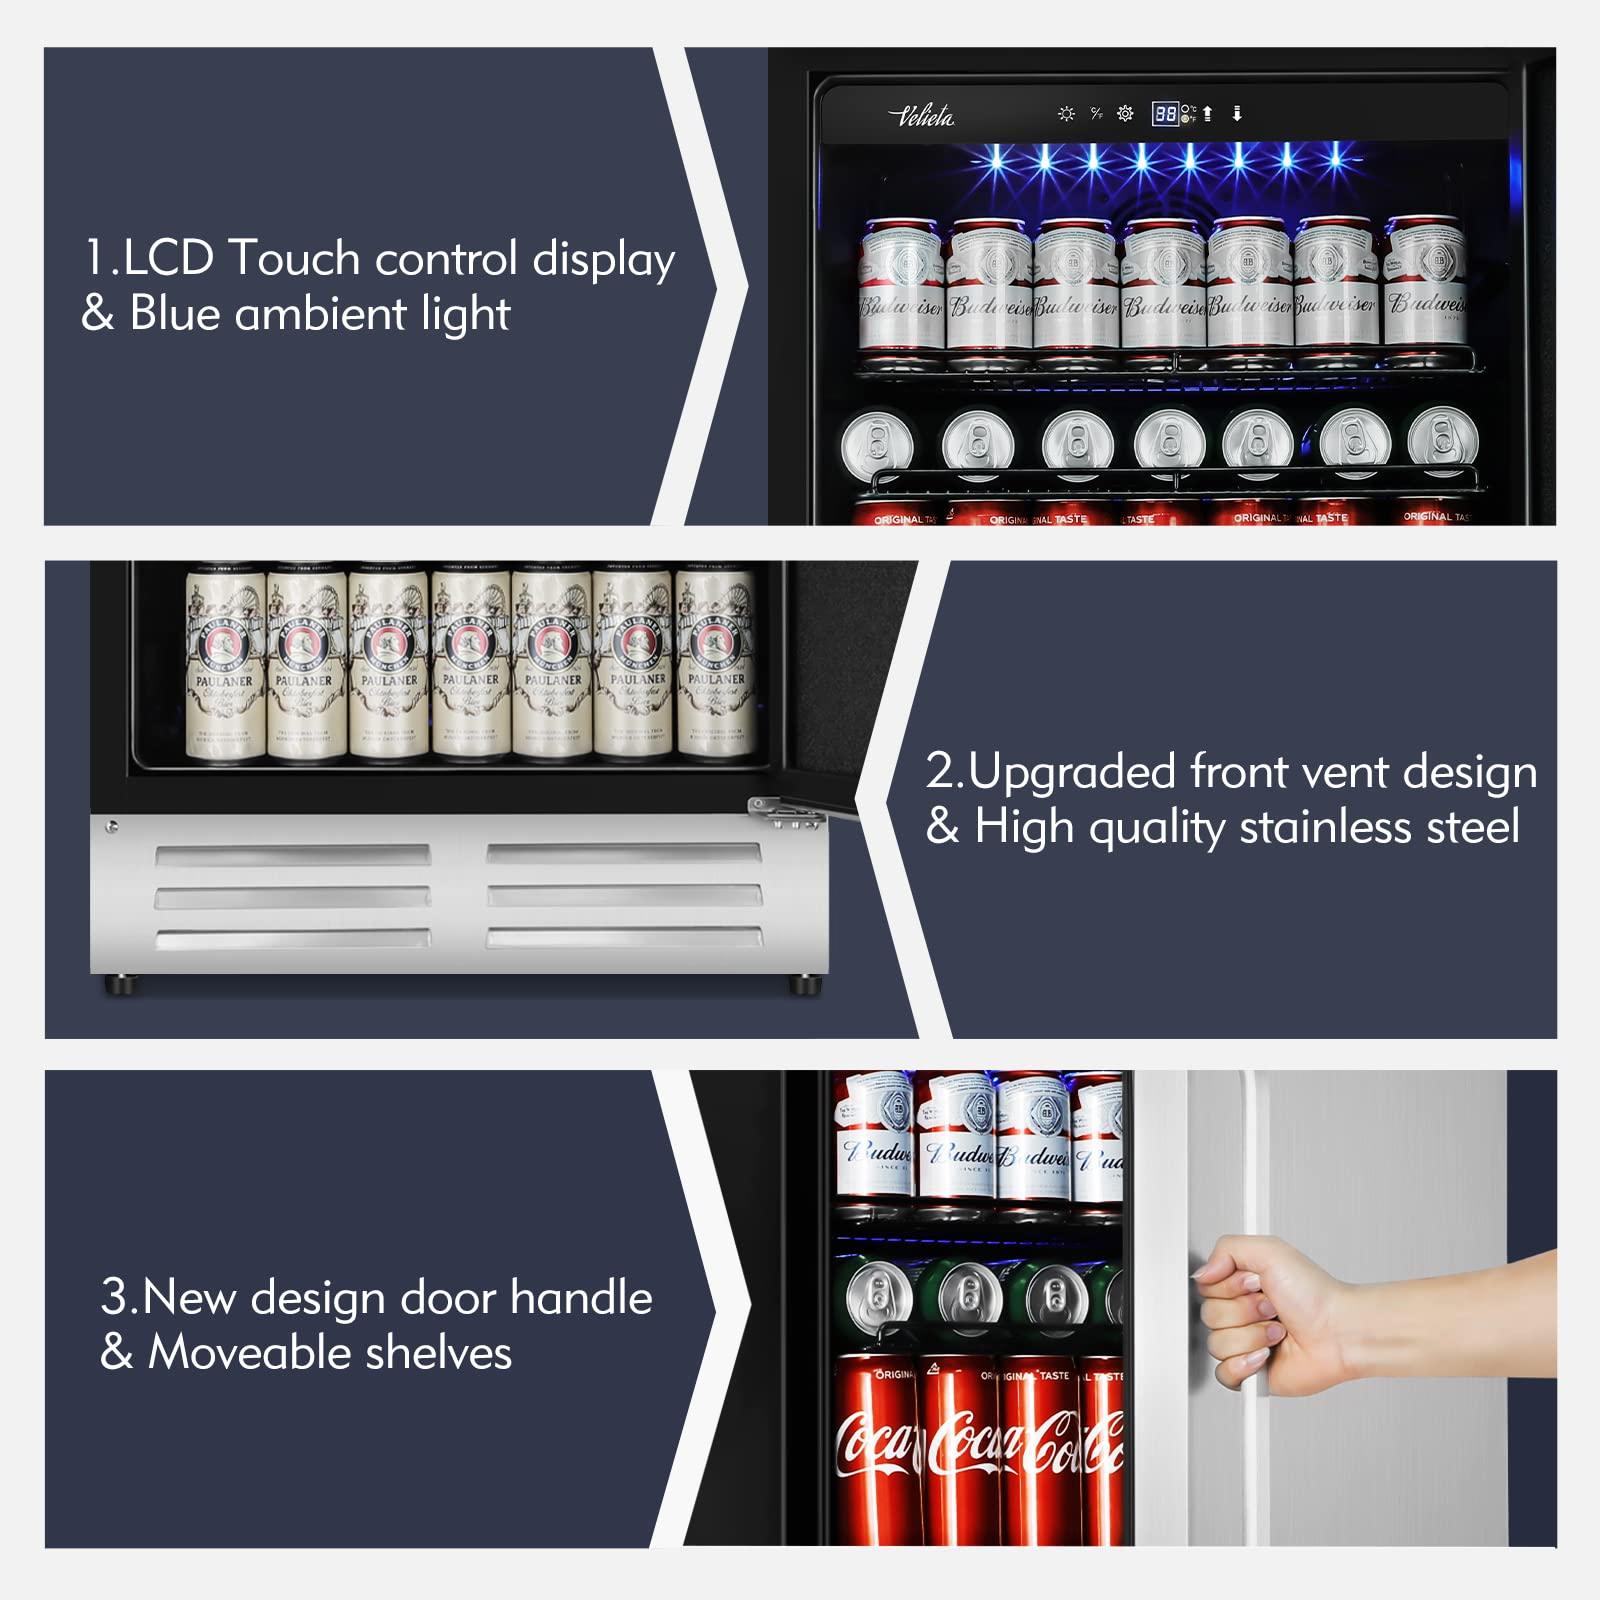 Velieta 24 Inch Beverage Refrigerator Cooler,Stainless Steel Wide Refrigerator for 210 Cans,Fit Perfectly for 24" Space Built-in Counter or Freestanding with powerful and quiet cooling system - CookCave